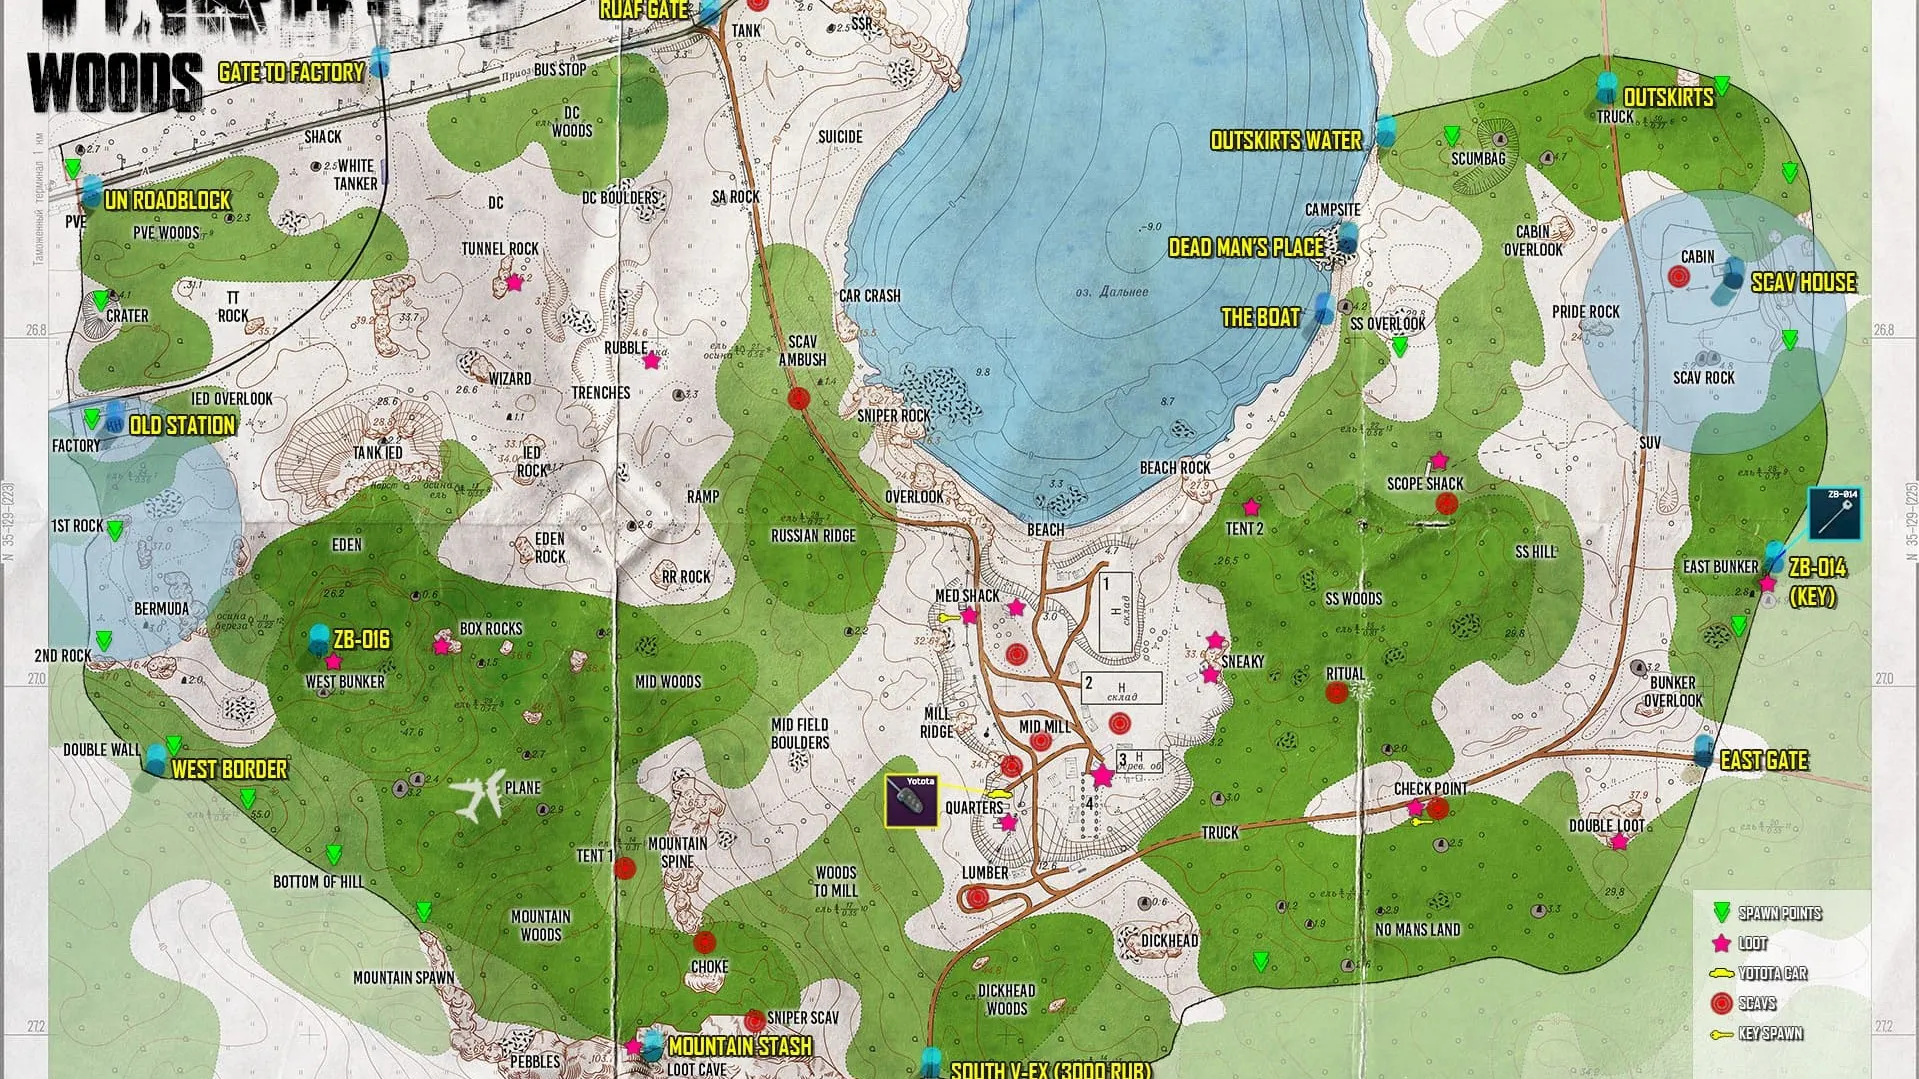 Escape From Tarkov Woods map guide loot and key locations, extraction